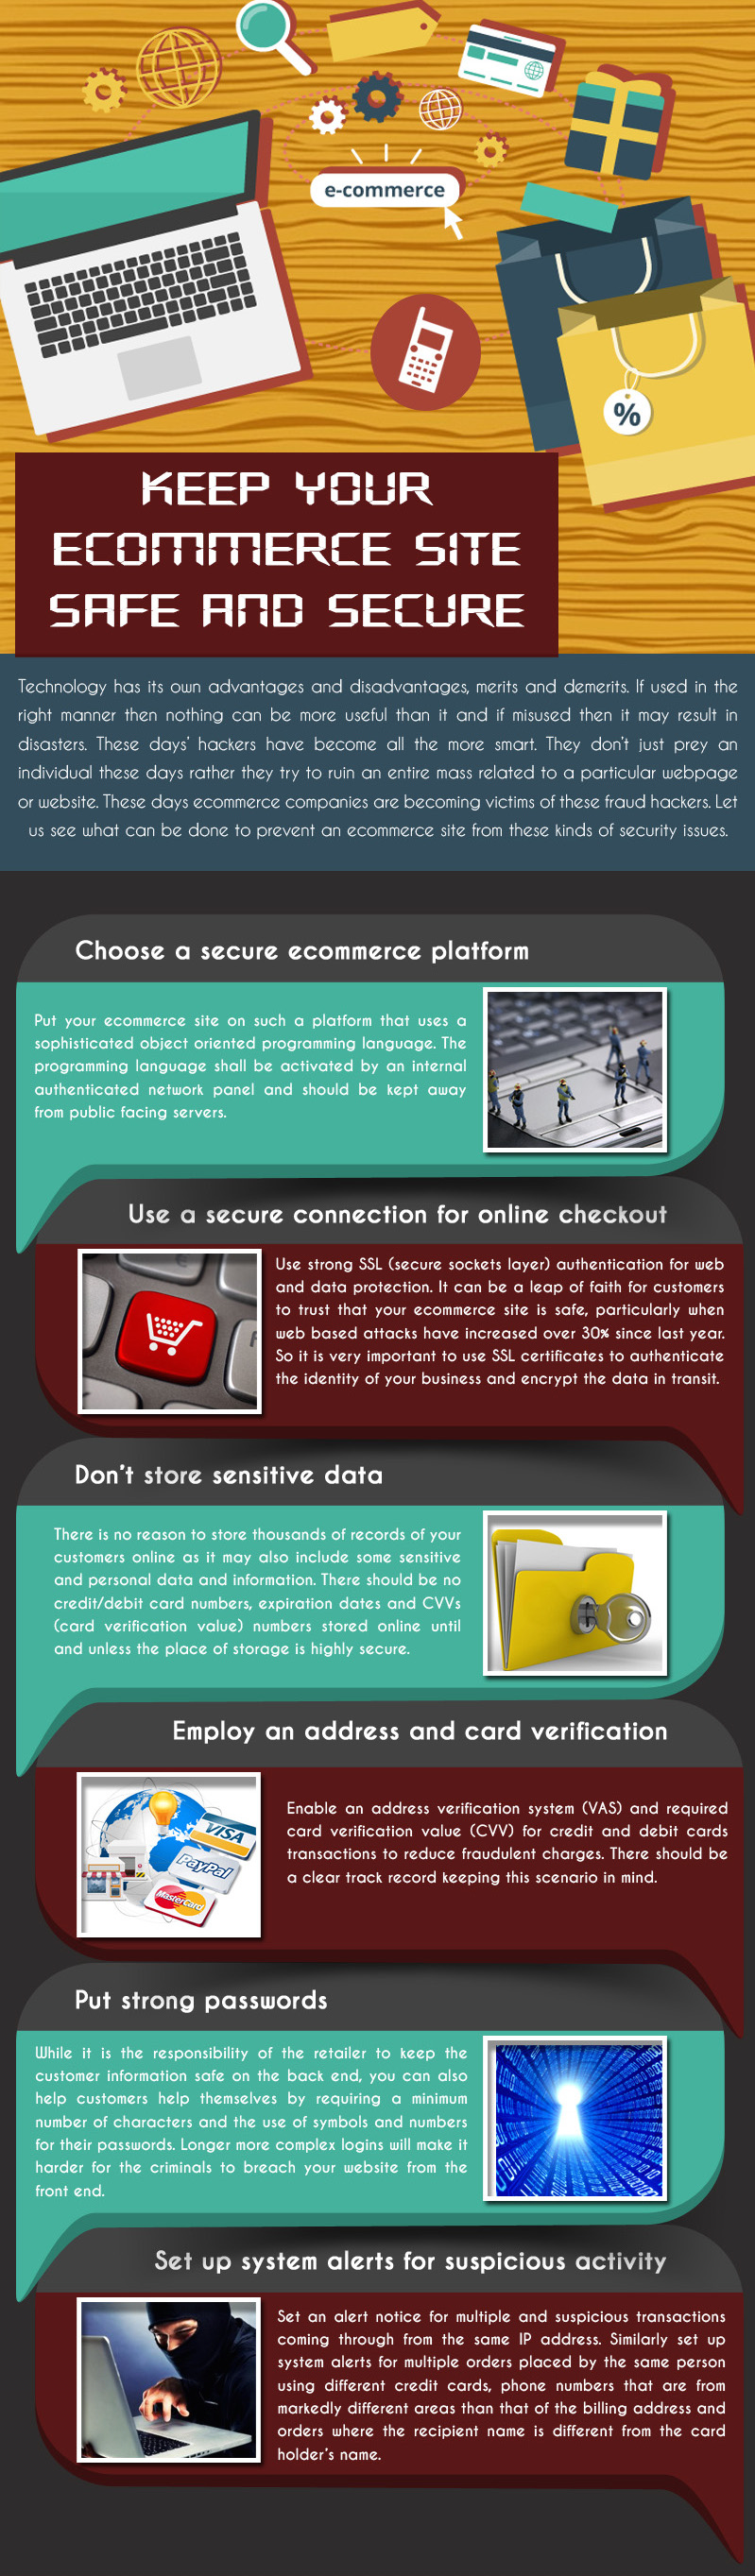 Keep Your Ecommerce Site Safe and Secure part 1